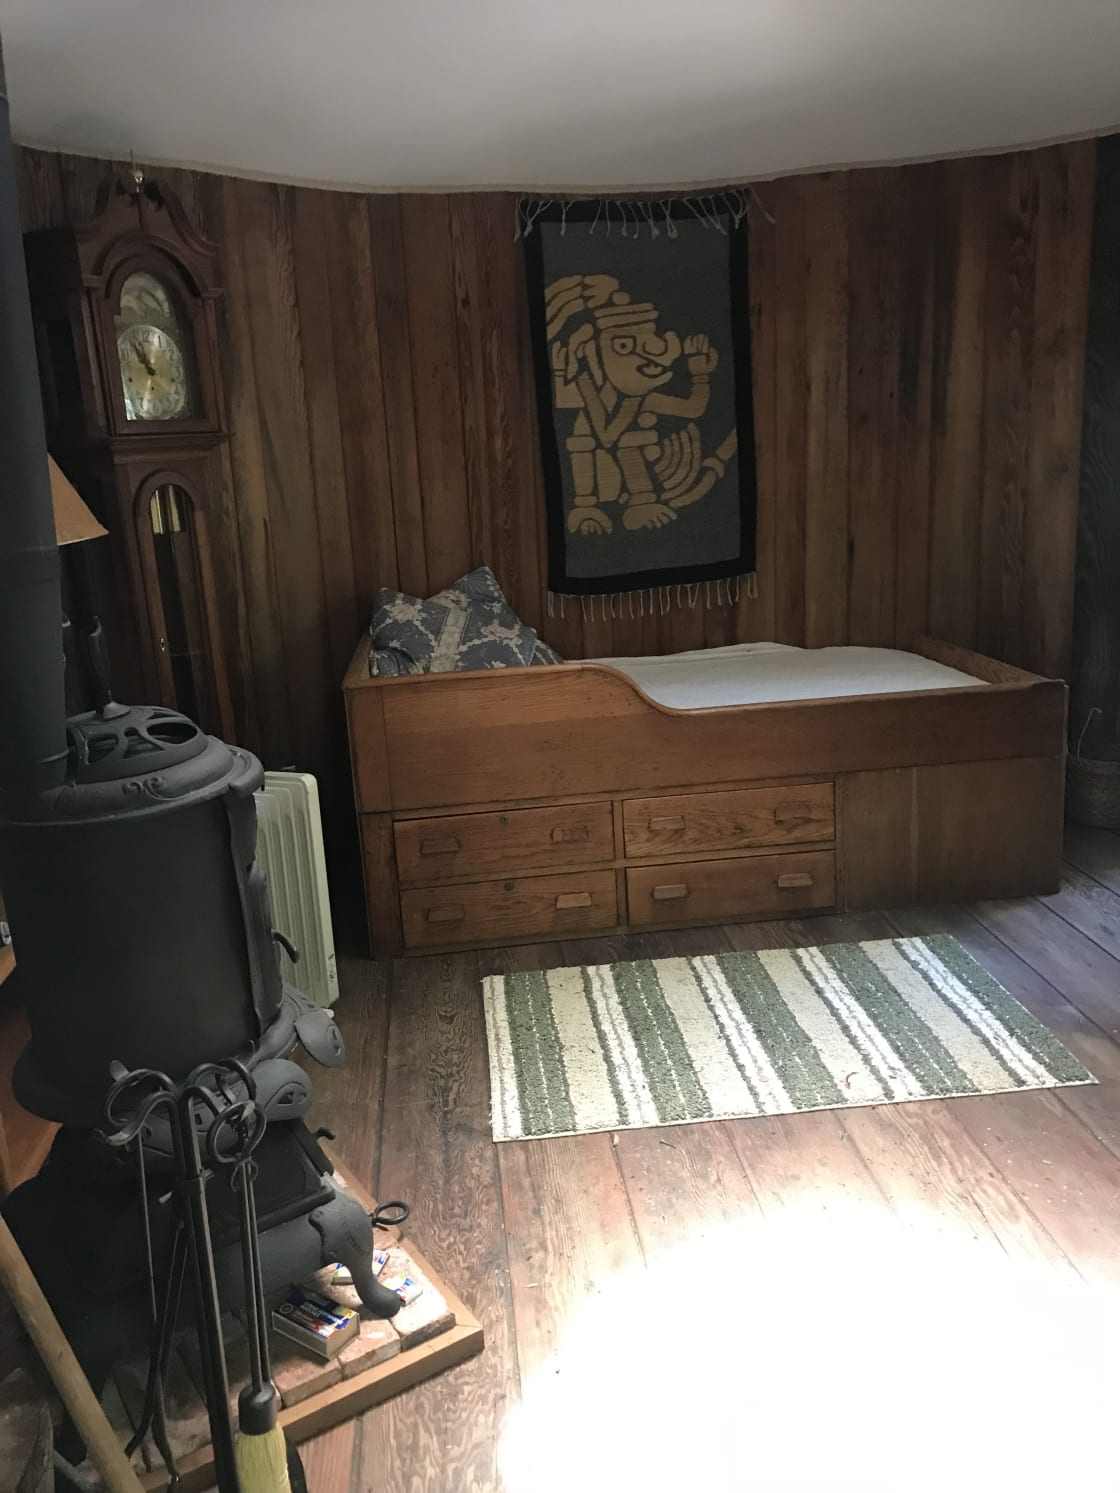 Captain's bunk and pot-belly wood stove